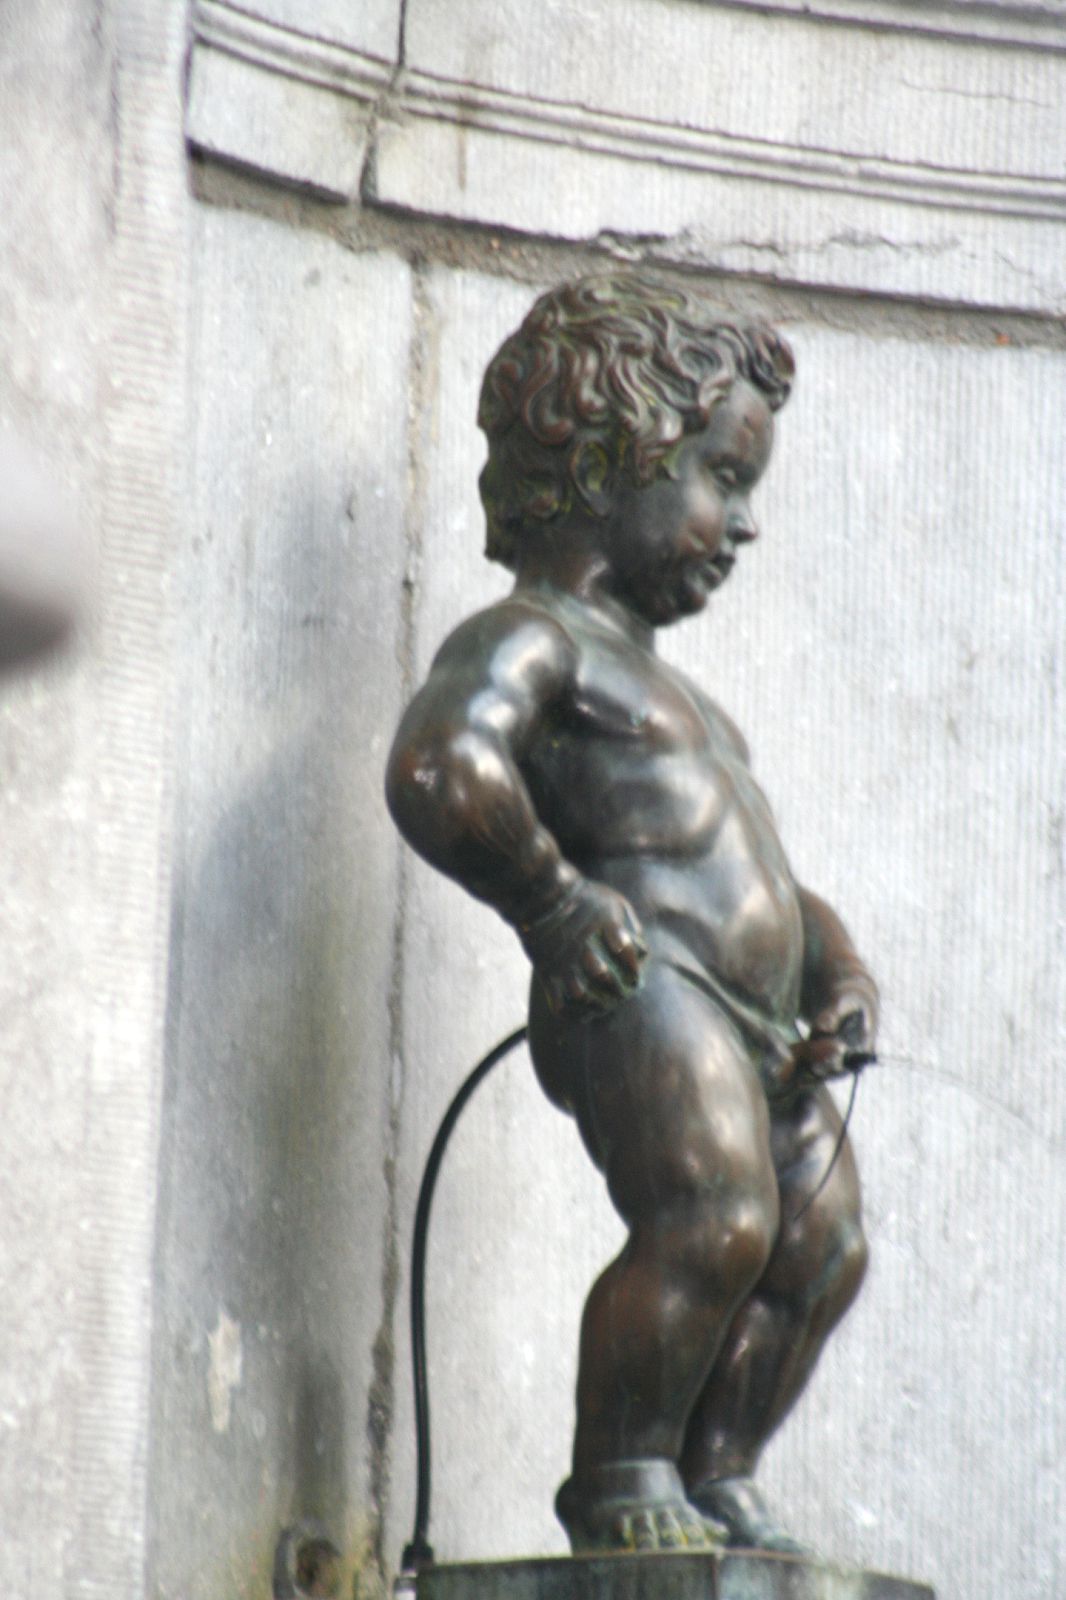 bronze statue of little boy holding an electric water hose